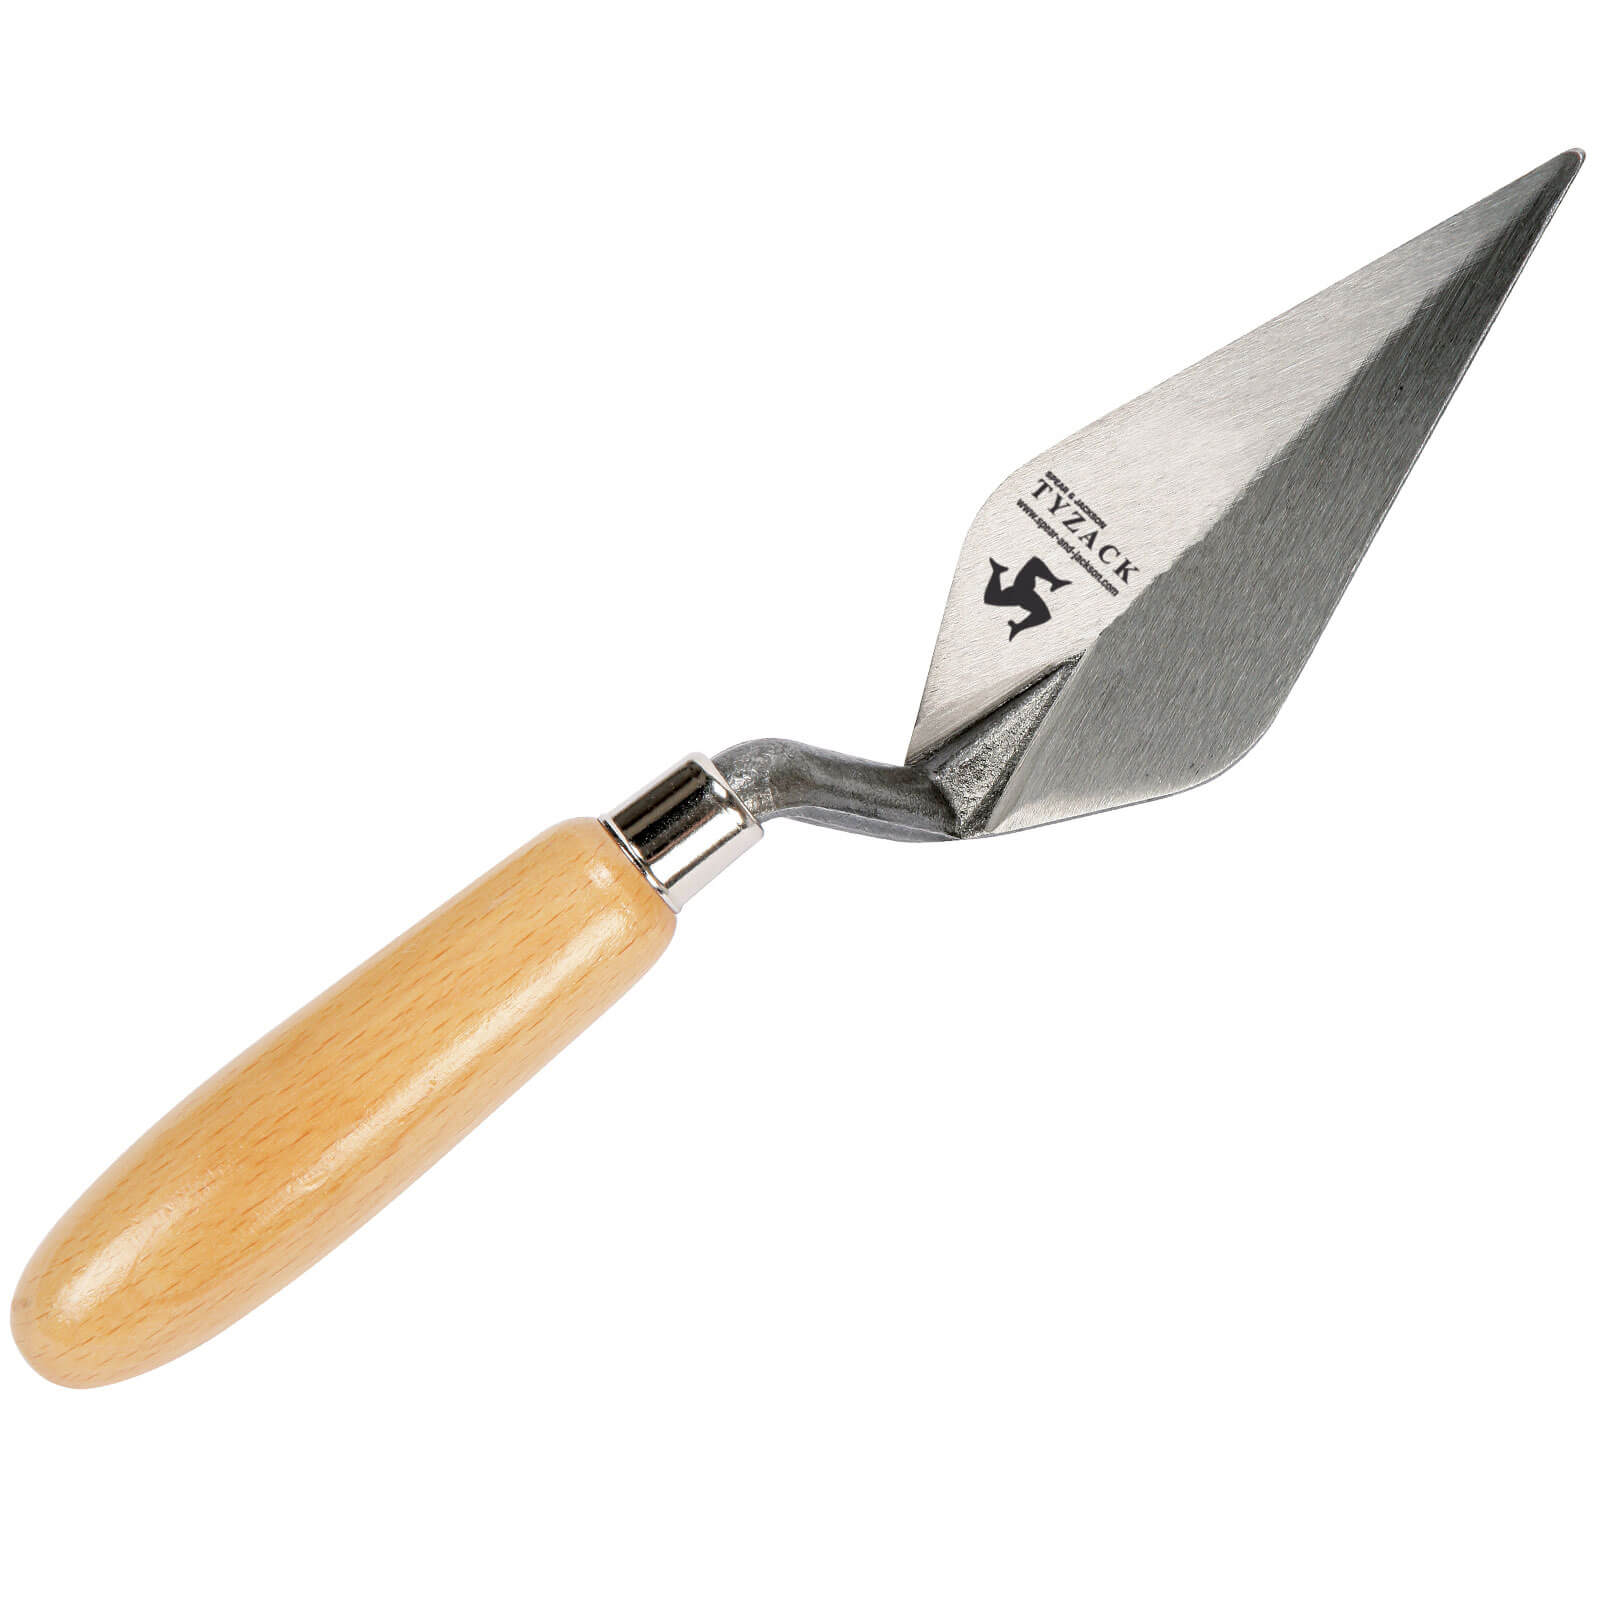 Image of Tyzack Pointing Trowel 6"